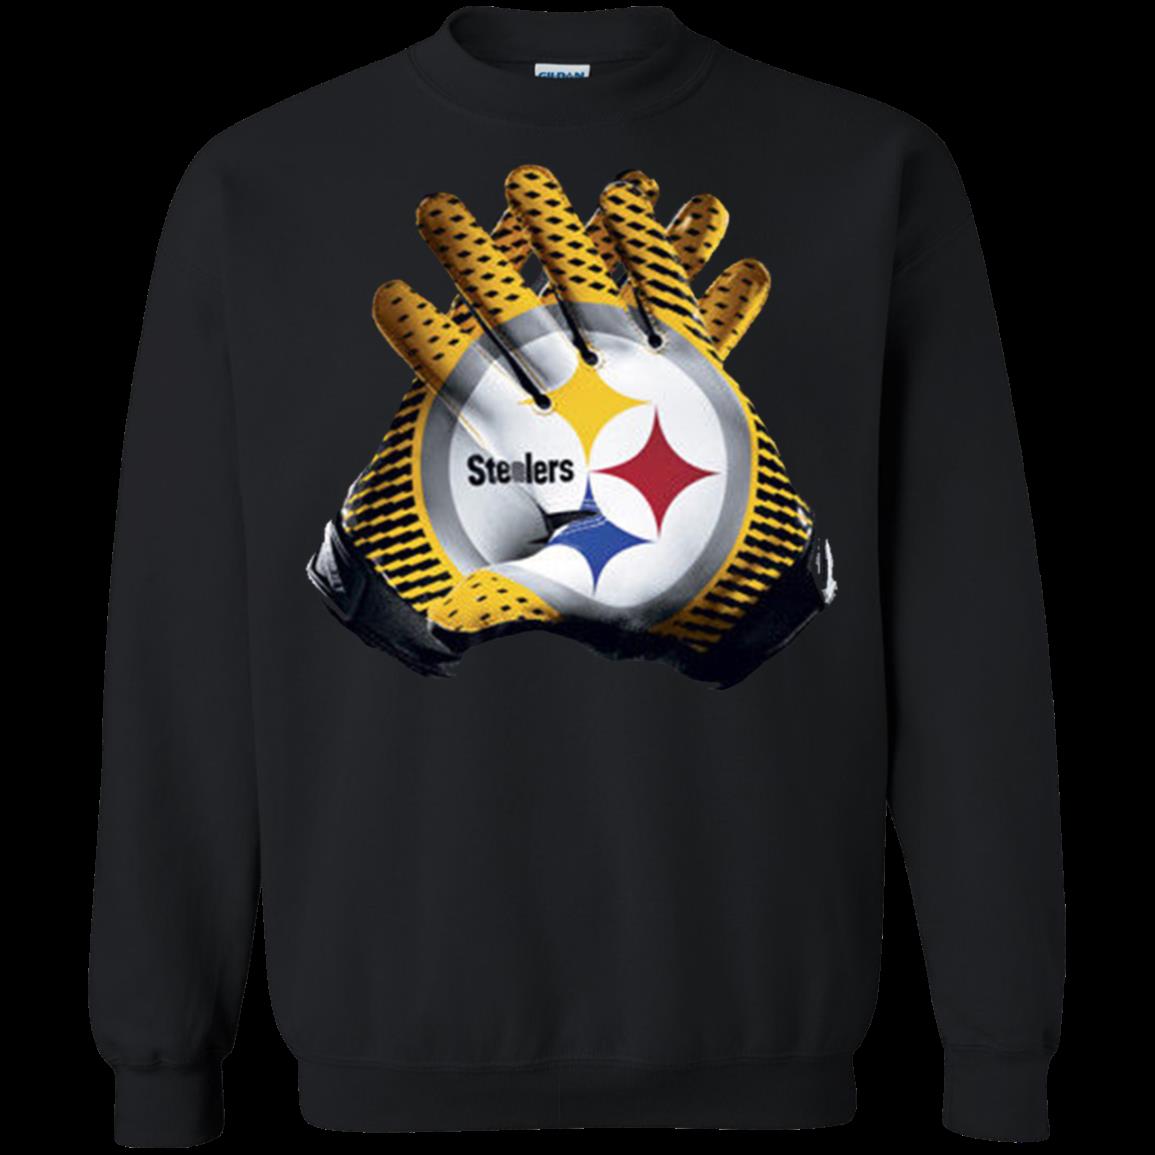 Pittsburgh Steelers Shirt Steelers Players Gloves Jersey Sweatshirt Moano  Store funny shirts, gift shirts, Tshirt, Hoodie, Sweatshirt , Long Sleeve,  Youth, Graphic Tee » Cool Gifts for You - Mfamilygift